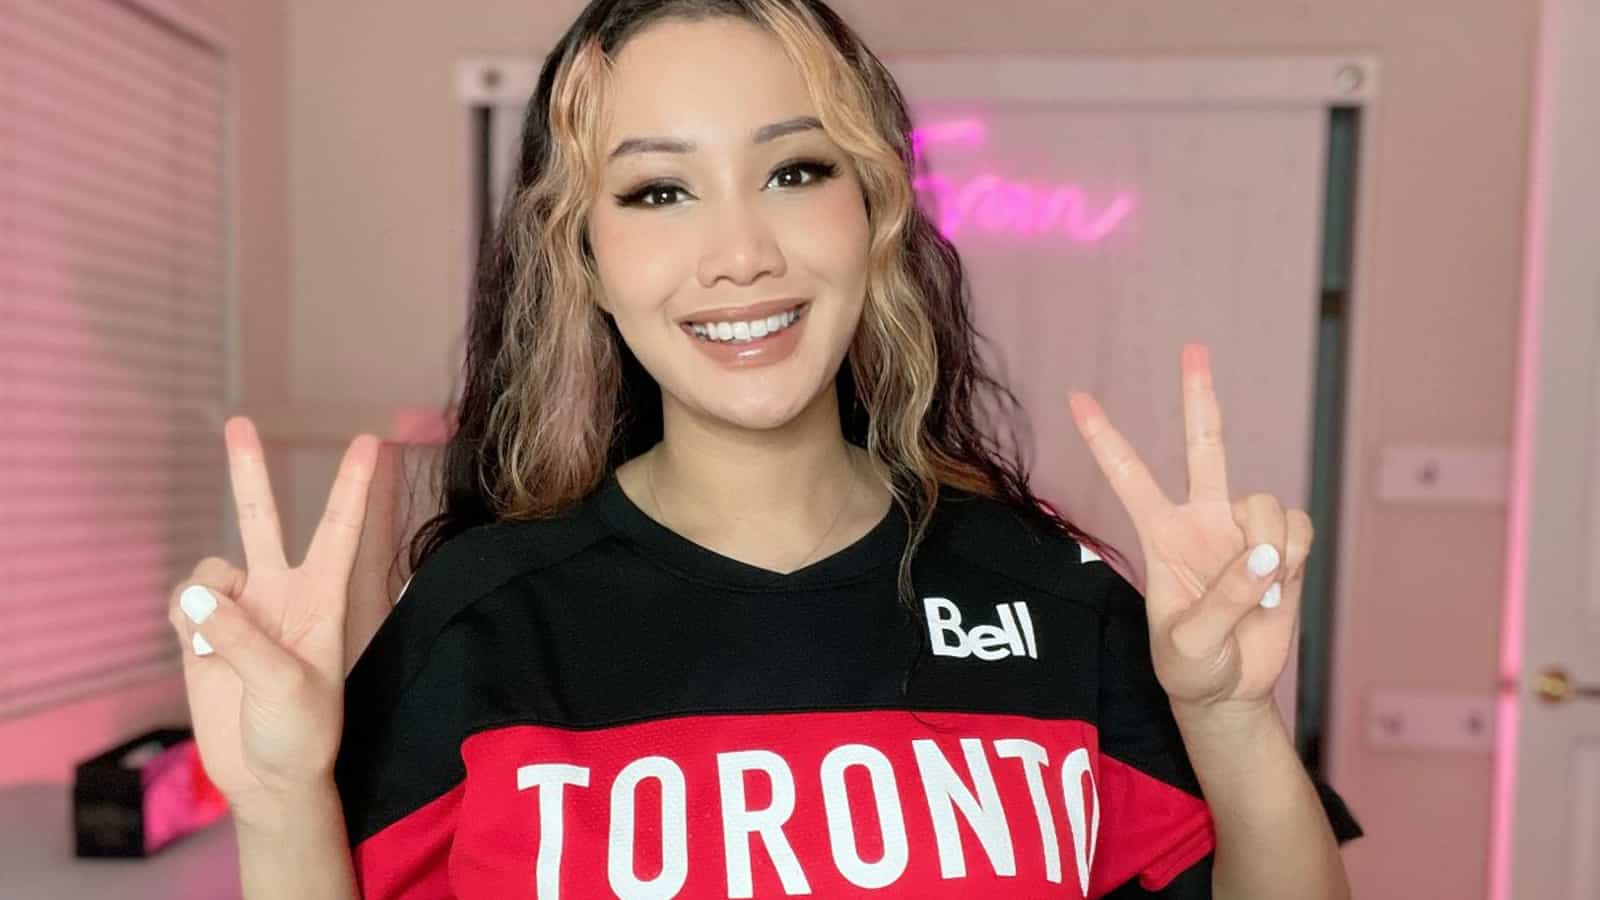 overwatch twitch streamer fran looks at camera doing peace signs in toronto defiant t-shirt